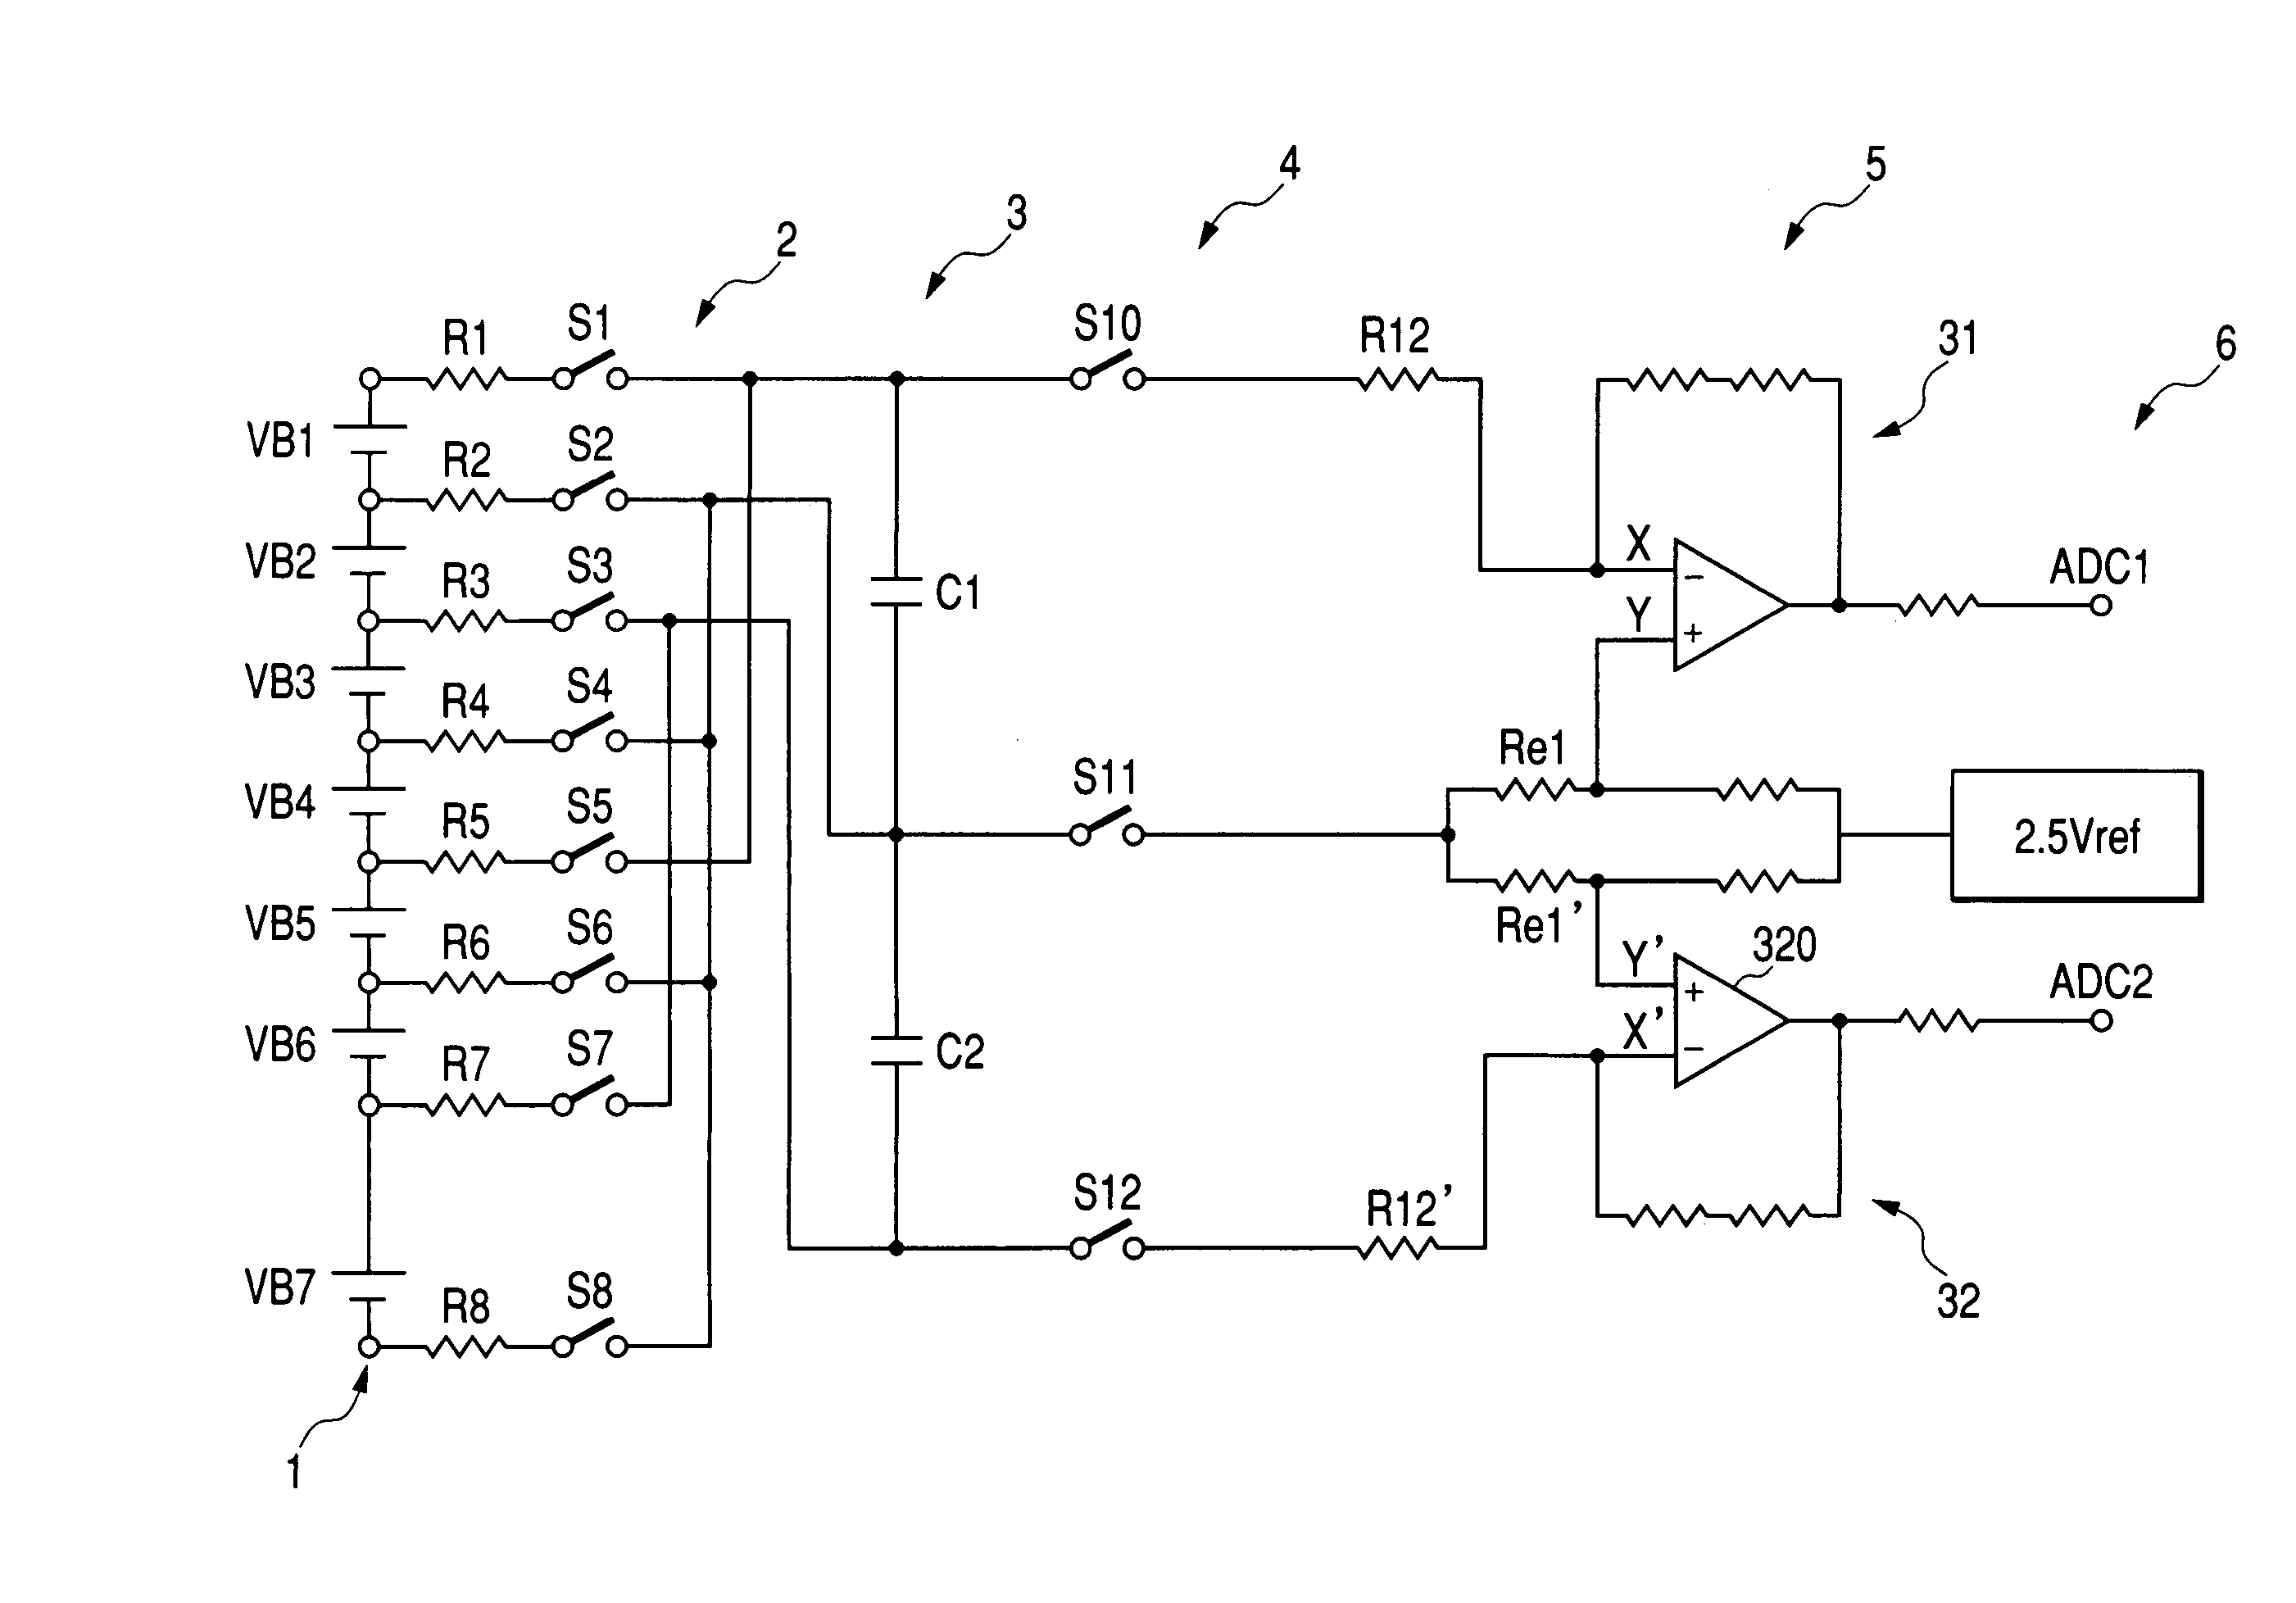 Voltage detecting apparatus applicable to a combination battery